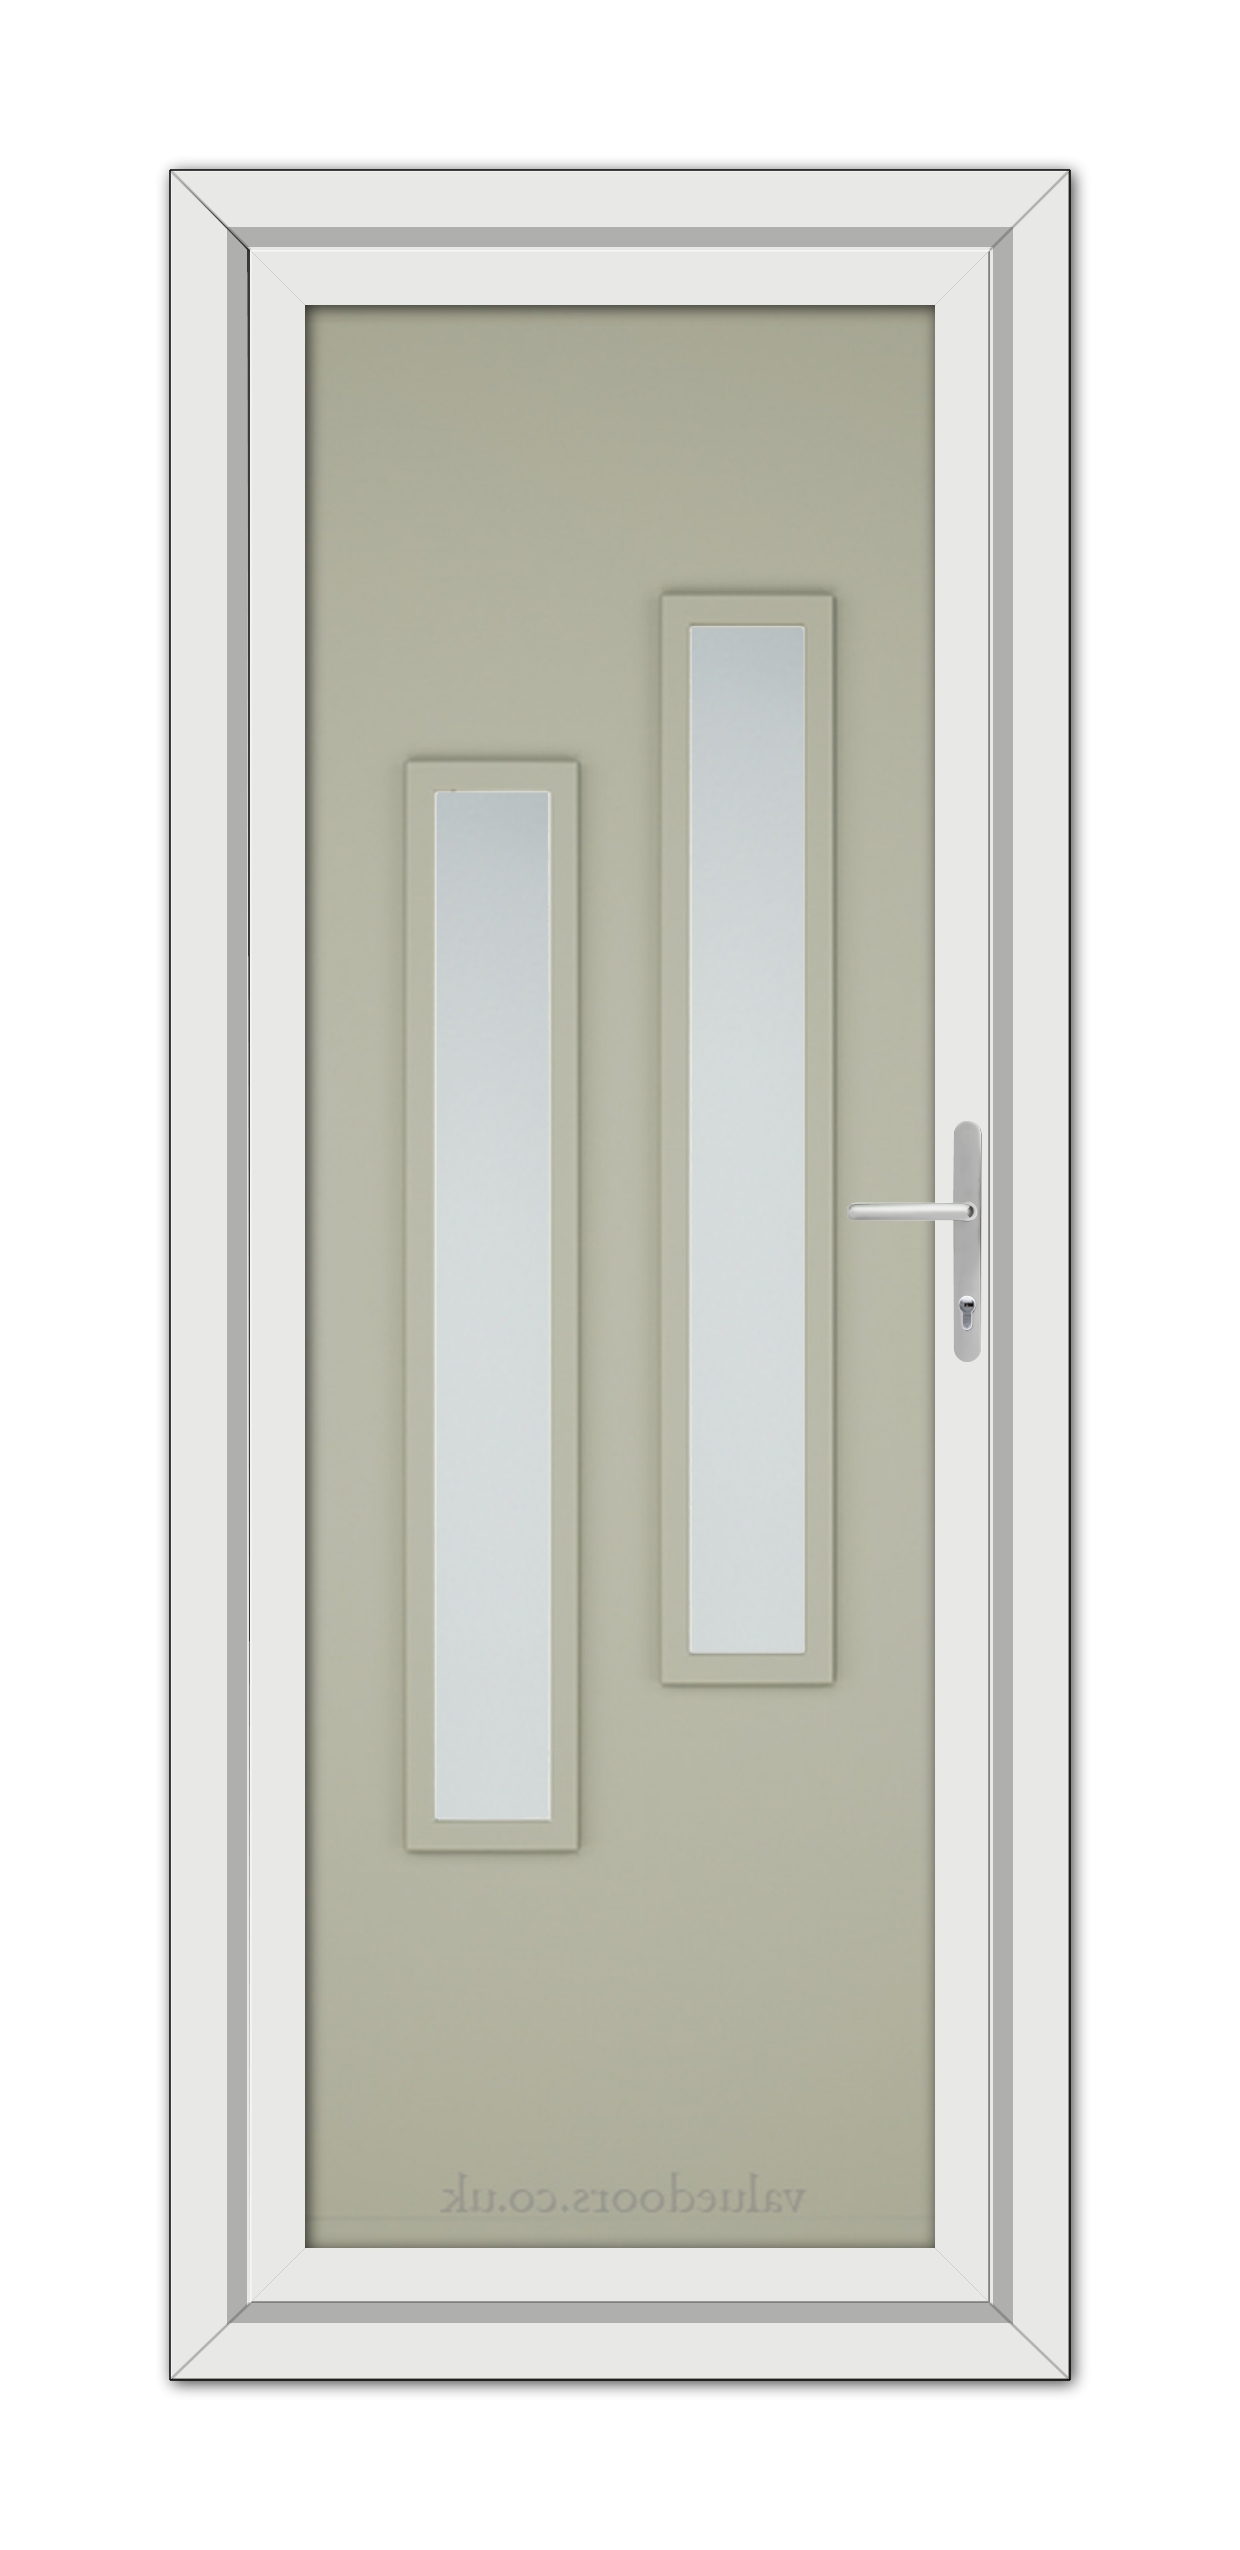 A Agate Grey Modern 5082 uPVC Door featuring a white frame and two vertical glass panels, equipped with a metallic handle on the right side.